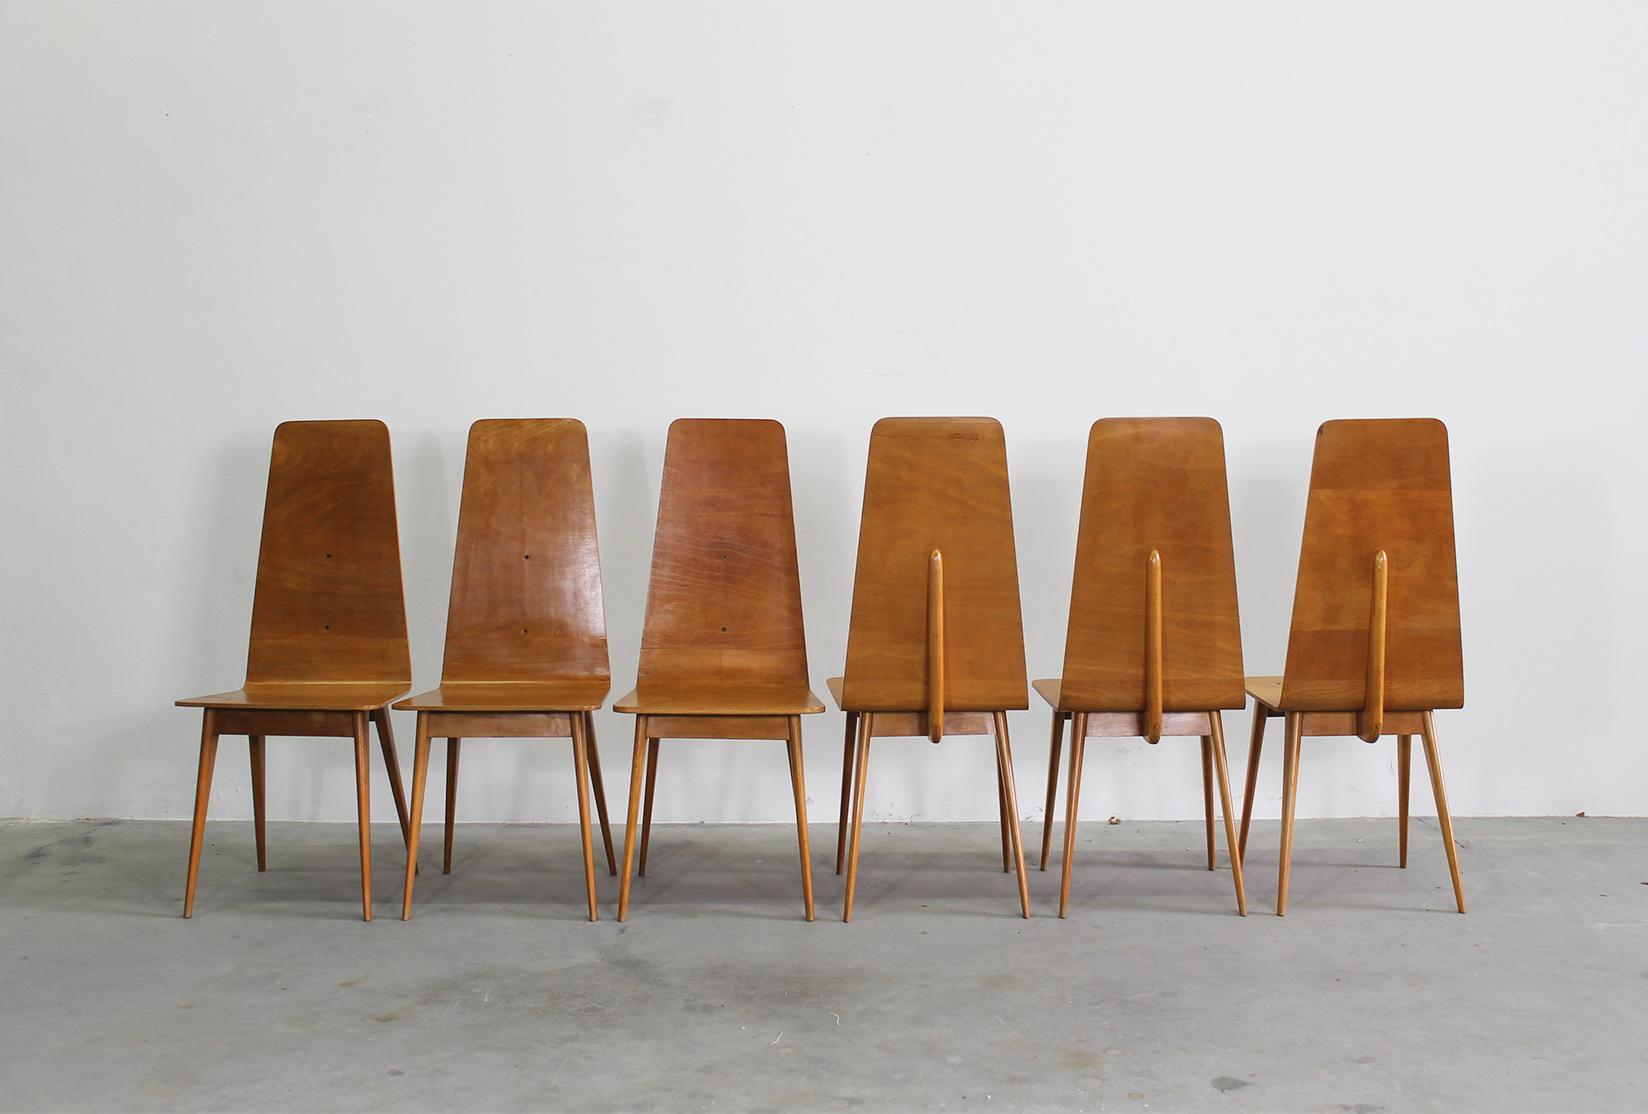 Other Set of Six Dining Chairs in Wood by Sineo Gemignani Italian Manufacture 1940s For Sale